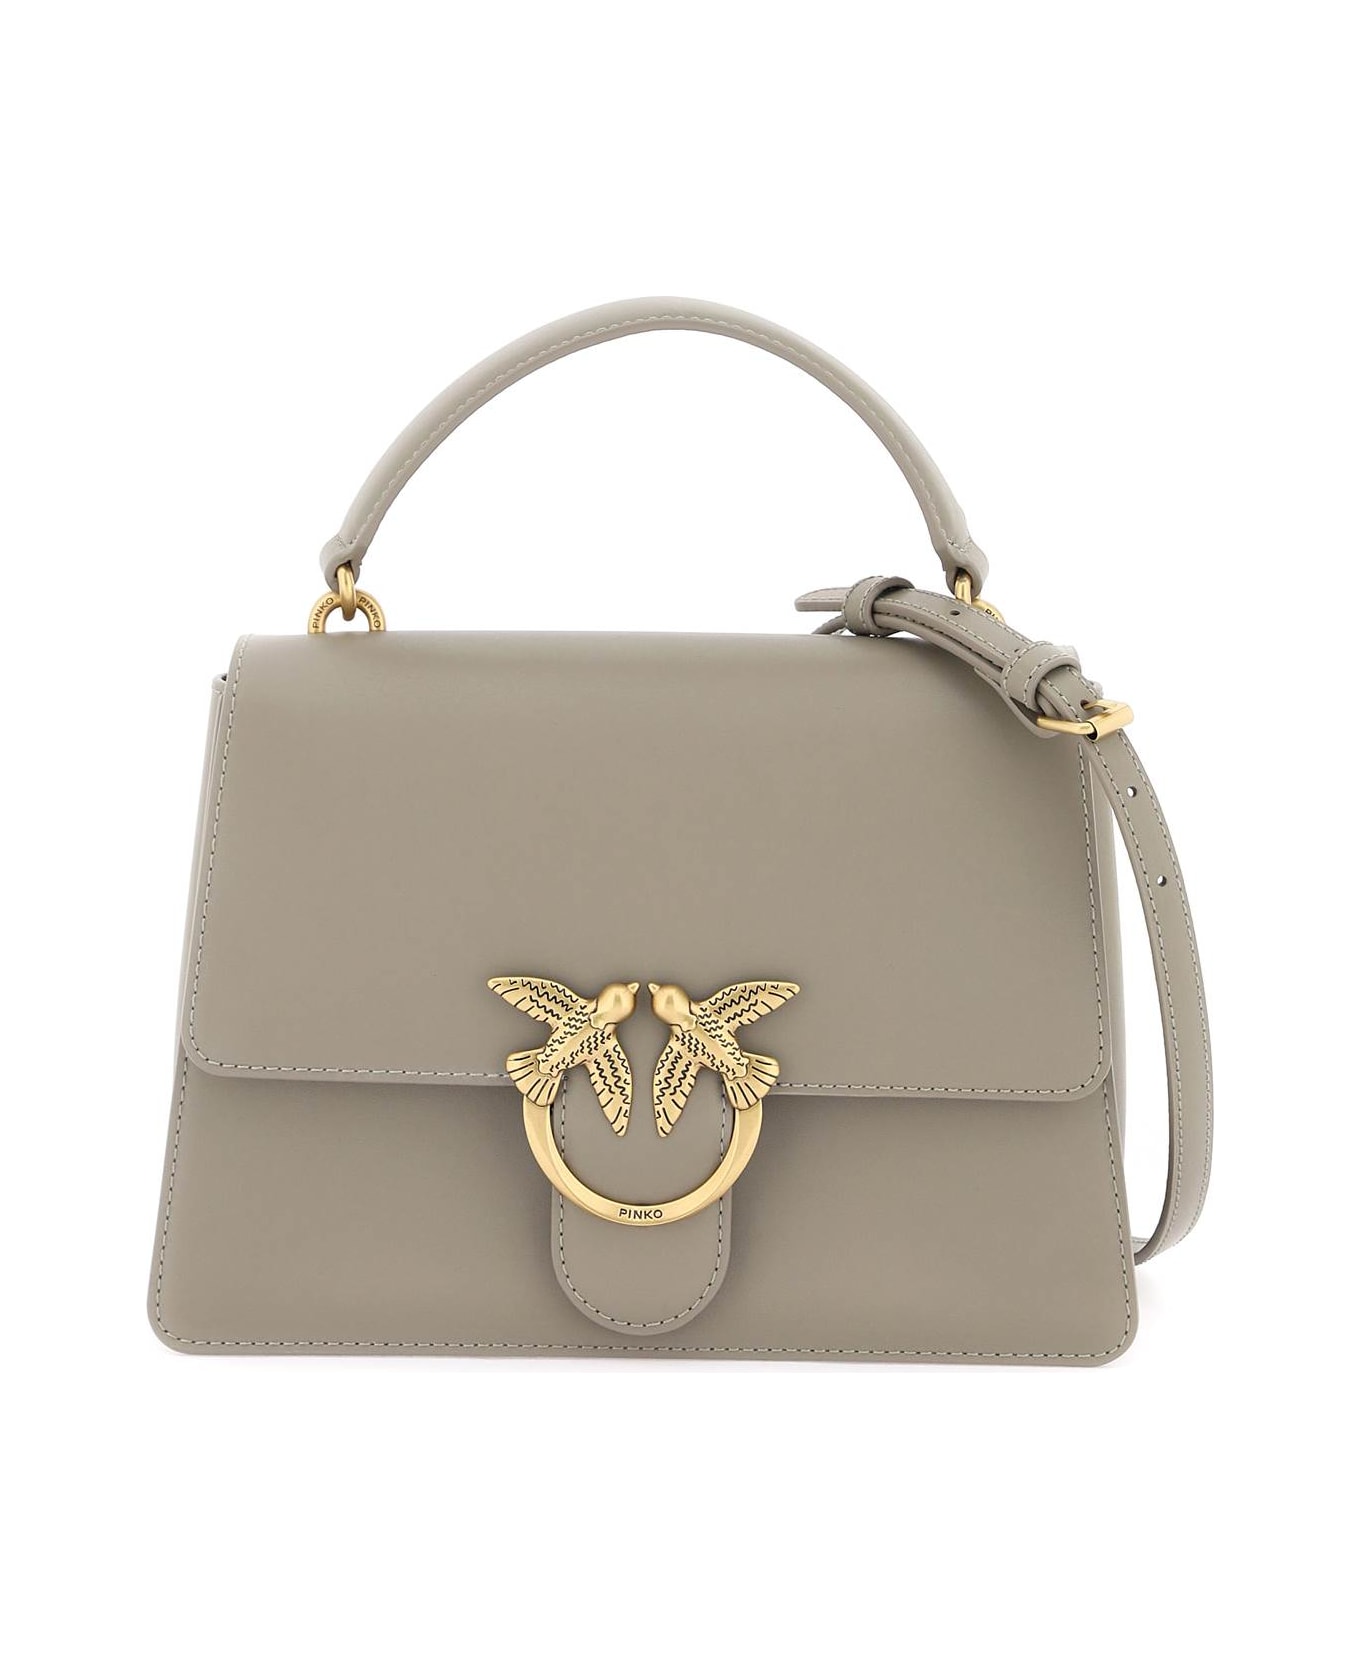 Pinko Love One Top Handle Classic Light Bag - NOCE ANTIQUE GOLD (Grey) トートバッグ